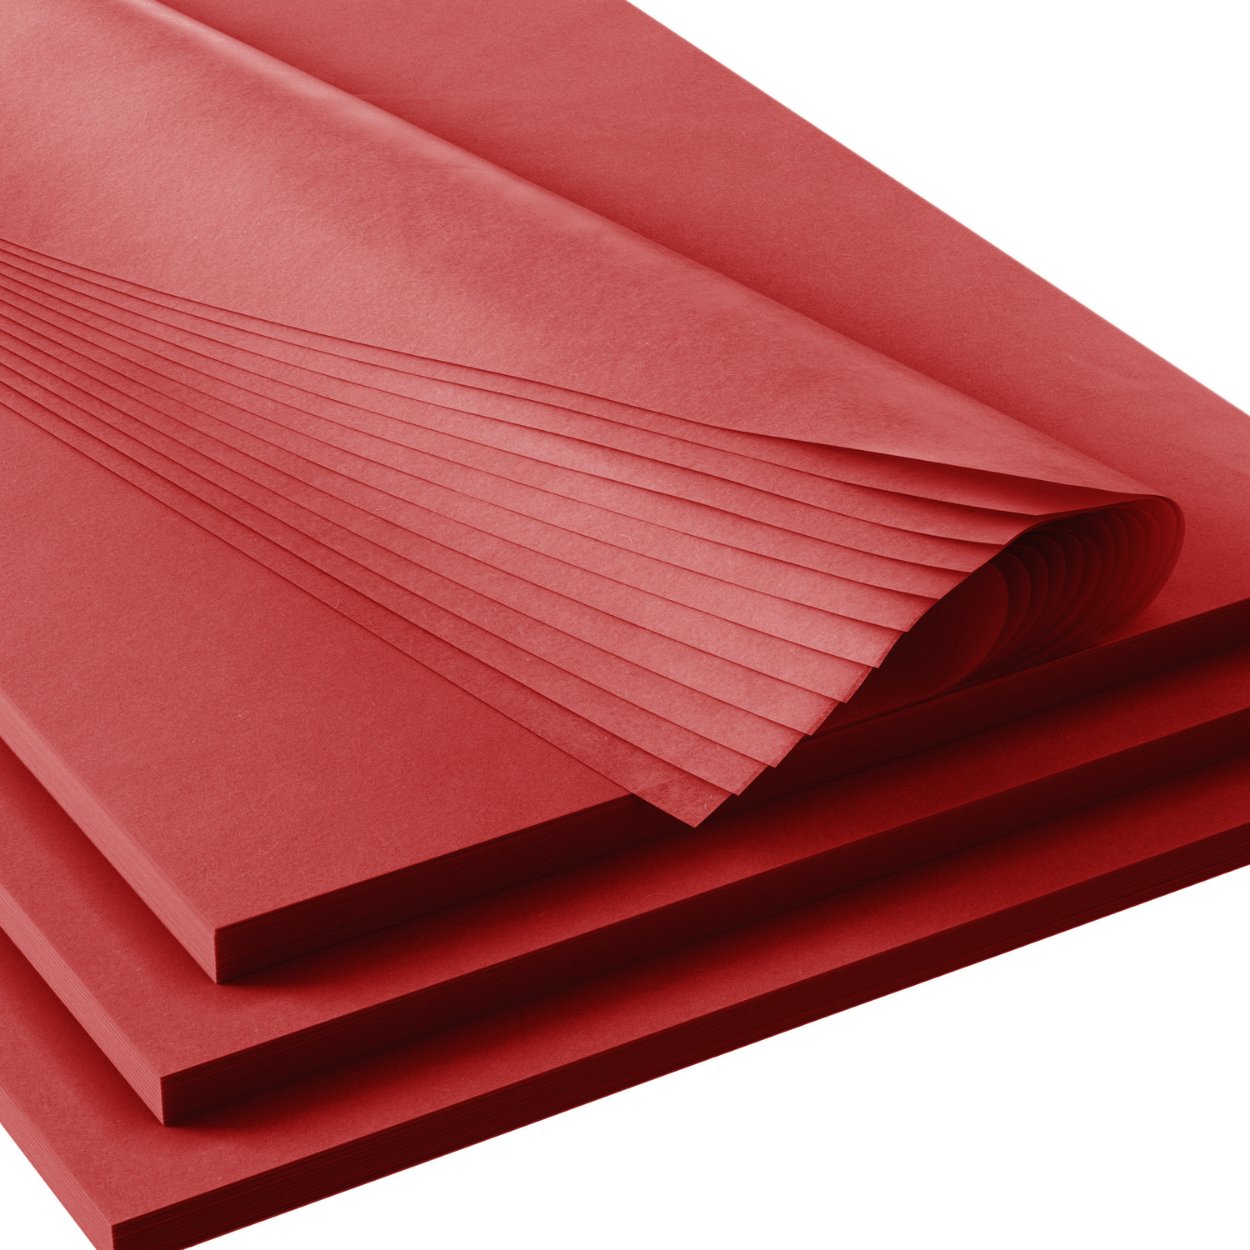  Bright red Tissue Paper 15 x 20 Premium Tissue Paper 100 Pack  A1 bakery supplies Made in USA : Health & Household